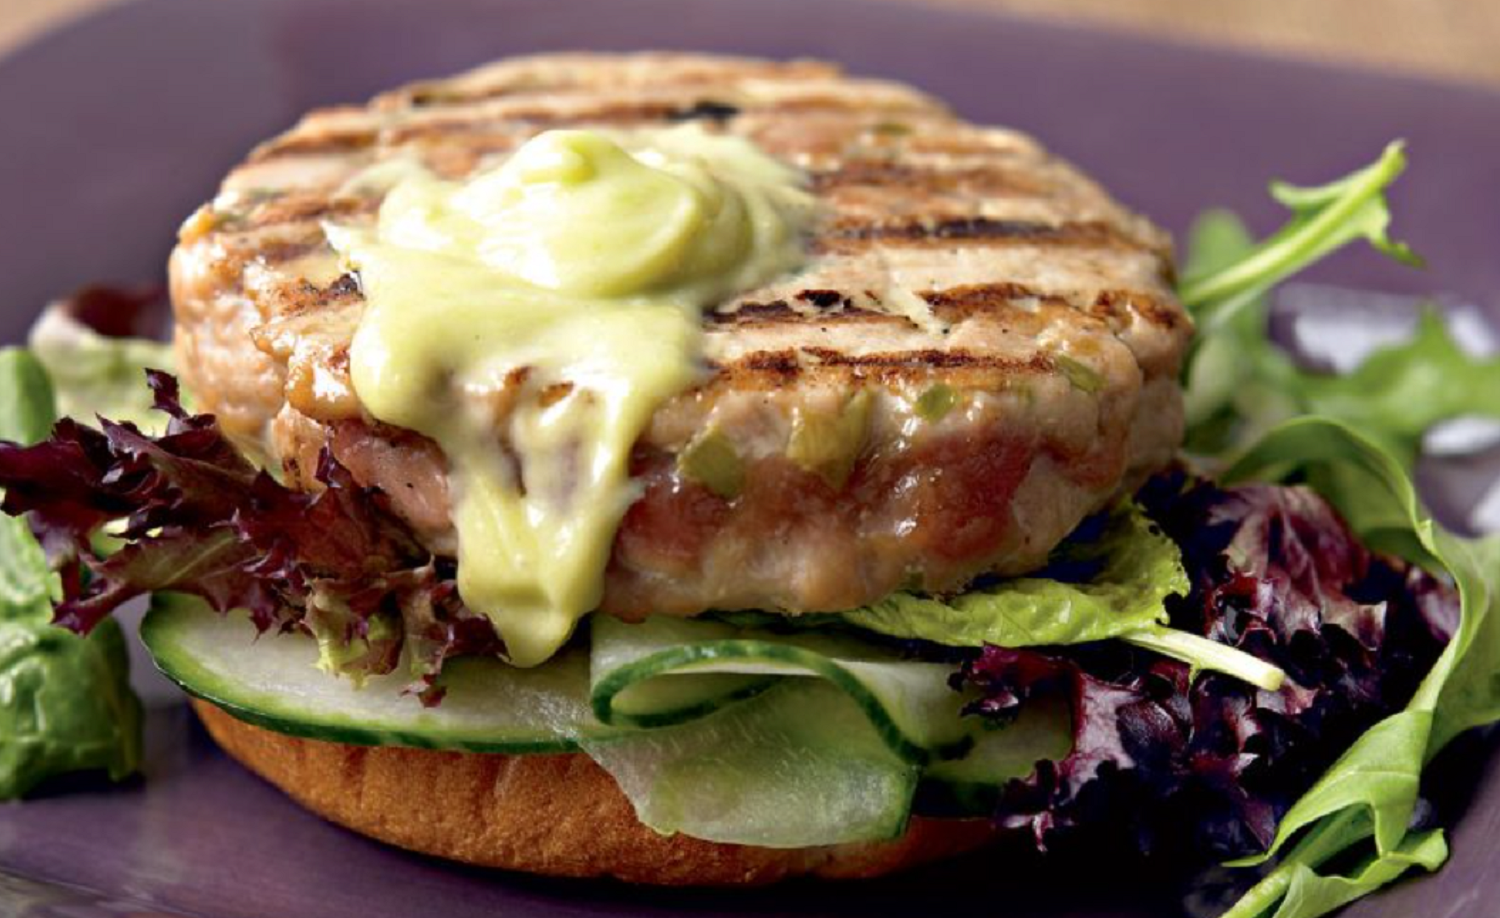 This Tuna Burger Is the Perfect Asian-Inspired Meal Anyone Would Enjoy